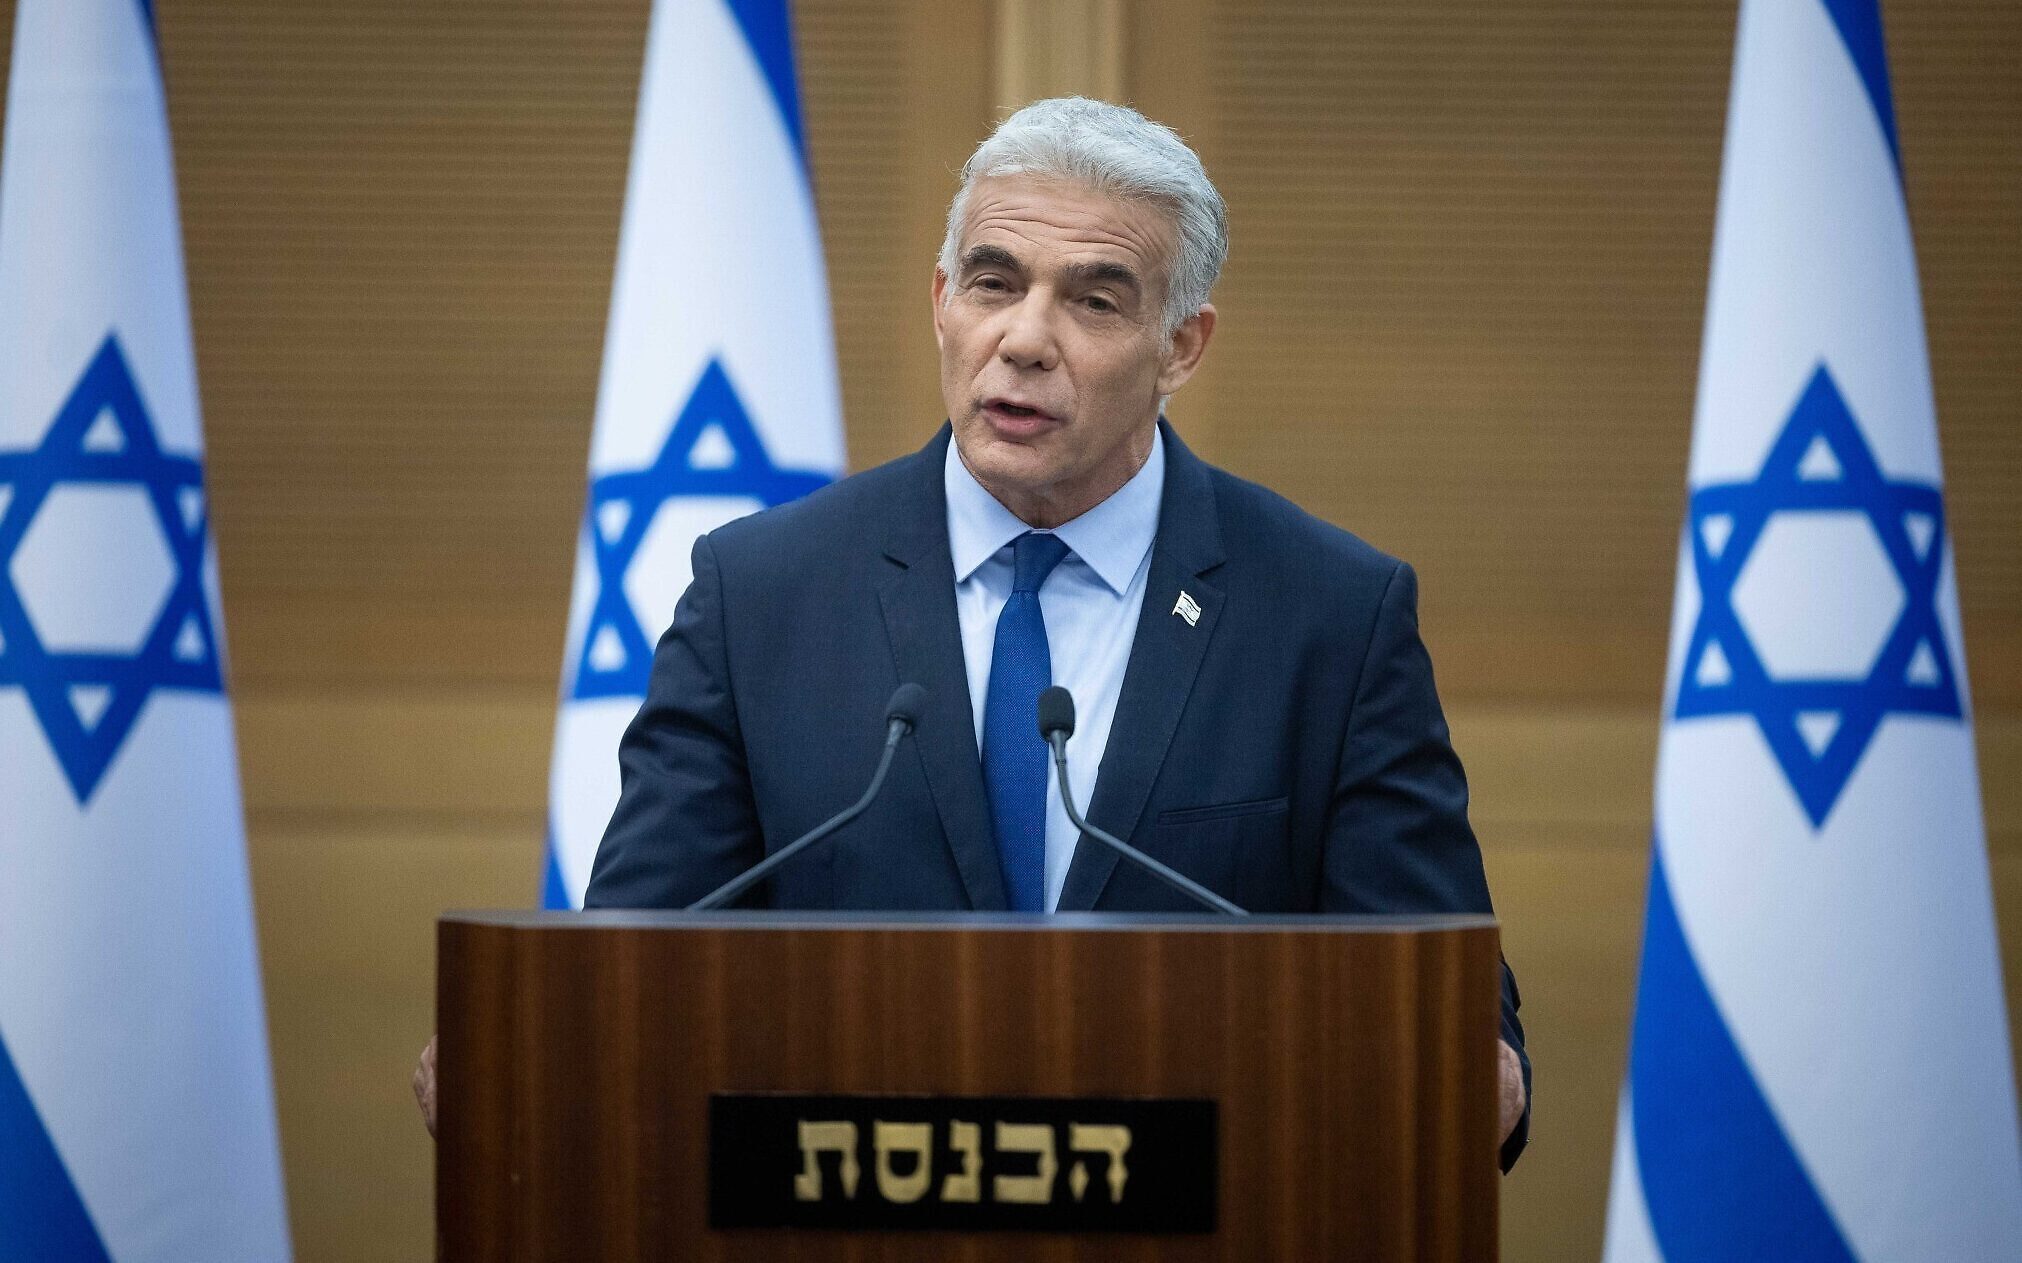 Yair Lapid Becomes Israel's New Prime Minister